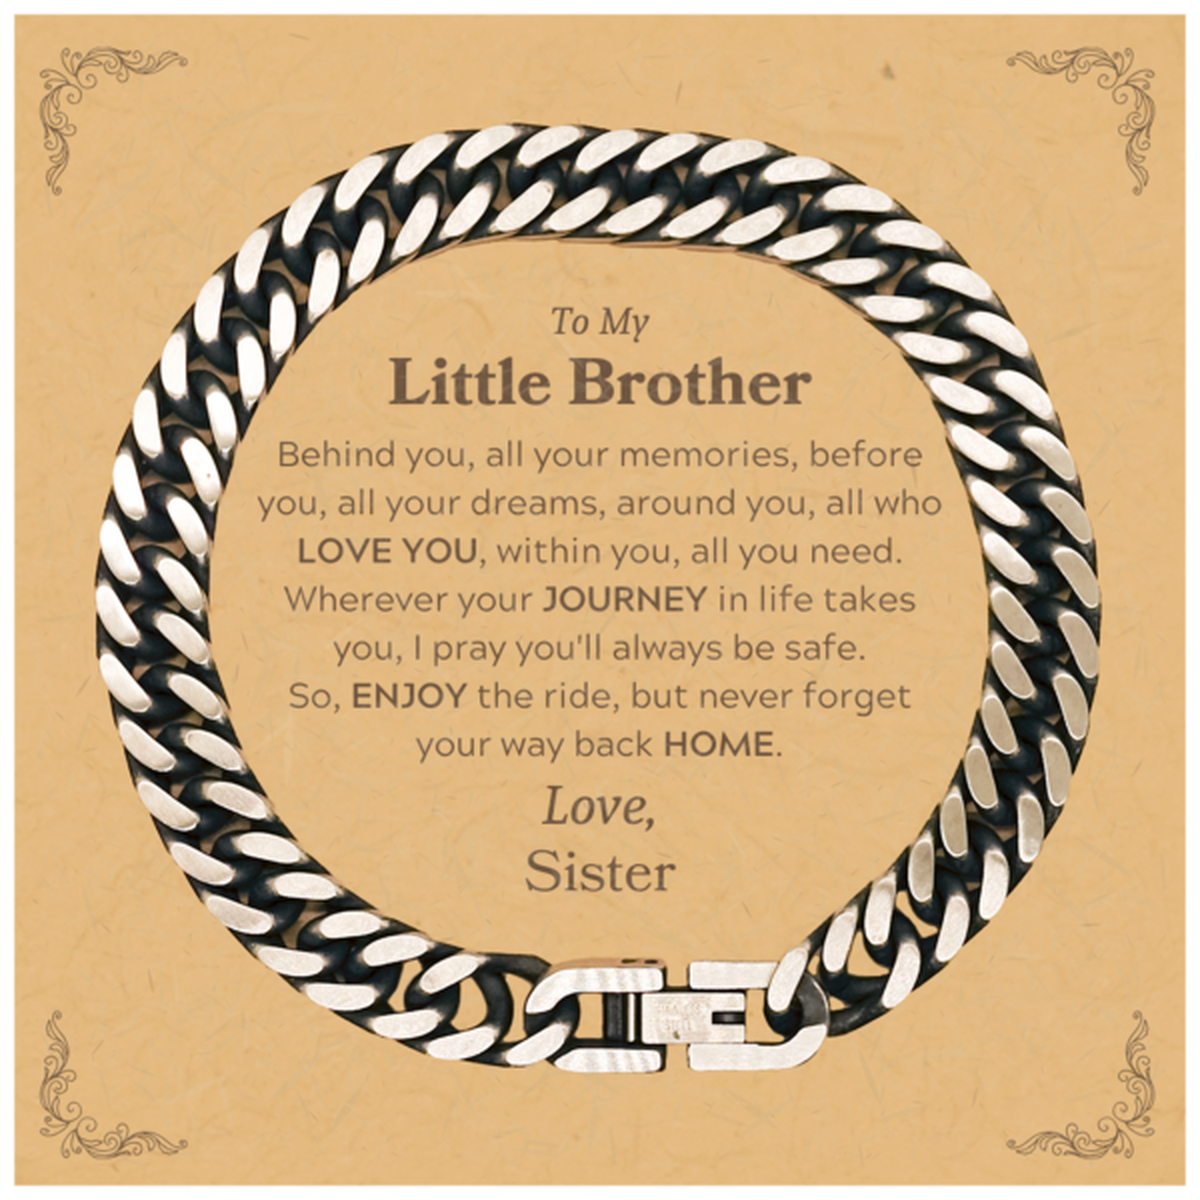 To My Little Brother Graduation Gifts from Sister, Little Brother Cuban Link Chain Bracelet Christmas Birthday Gifts for Little Brother Behind you, all your memories, before you, all your dreams. Love, Sister